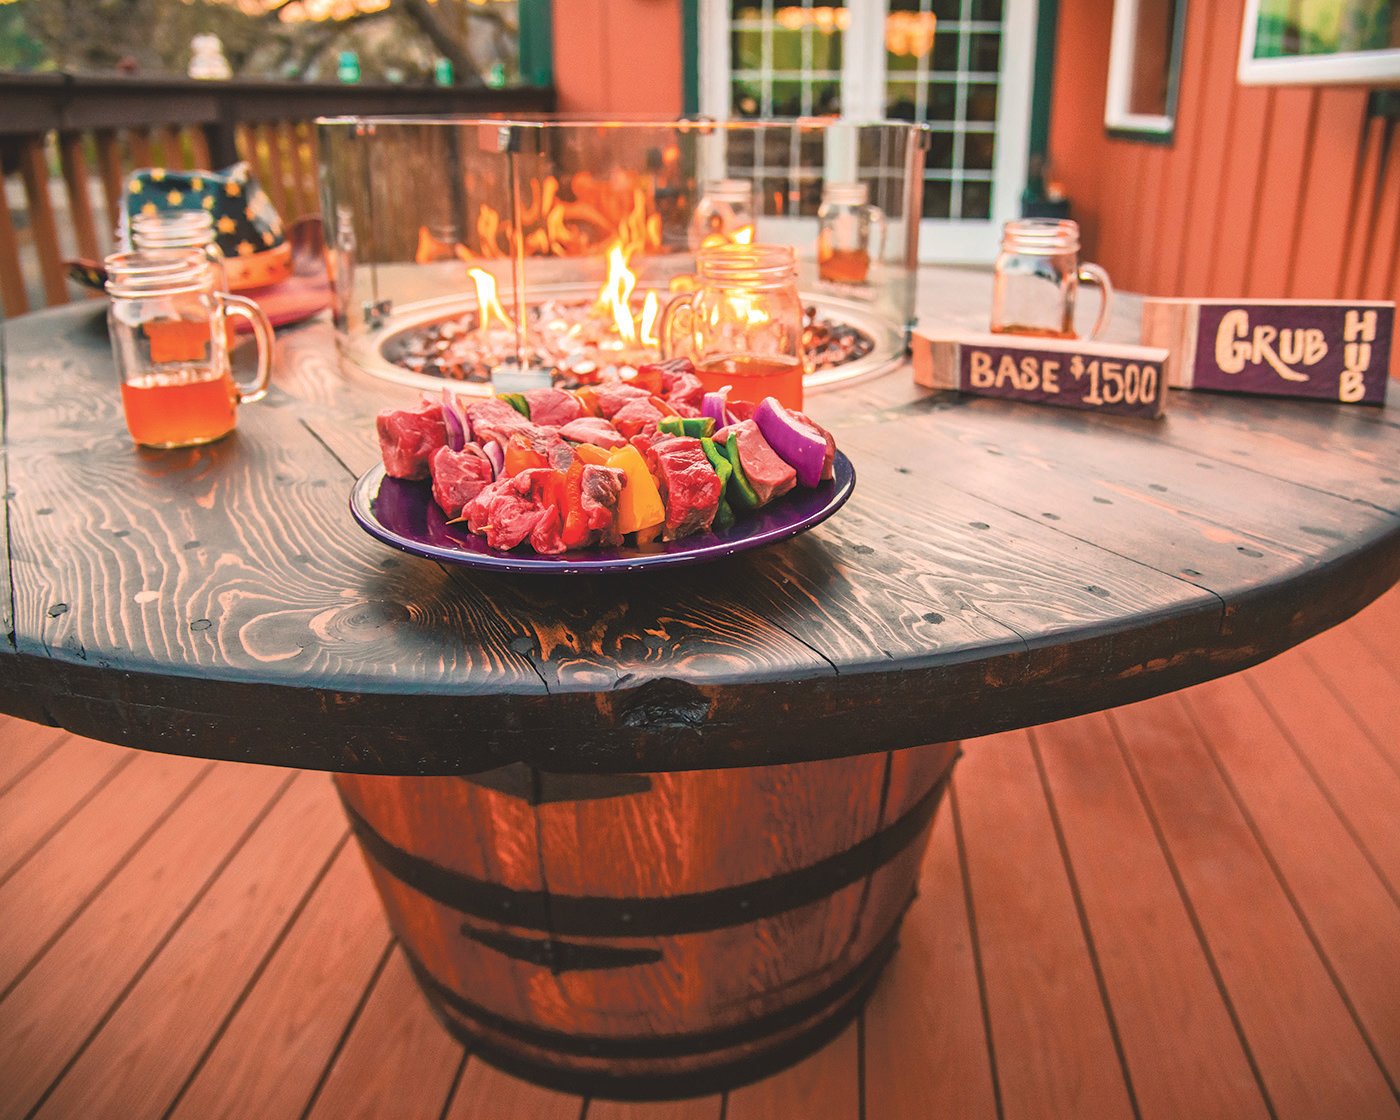 Flames rise as shish kabobs sit on a Bolan “Grub Hub” Barrel at Ron Bolan’s house in the Boistfort Valley Tuesday evening